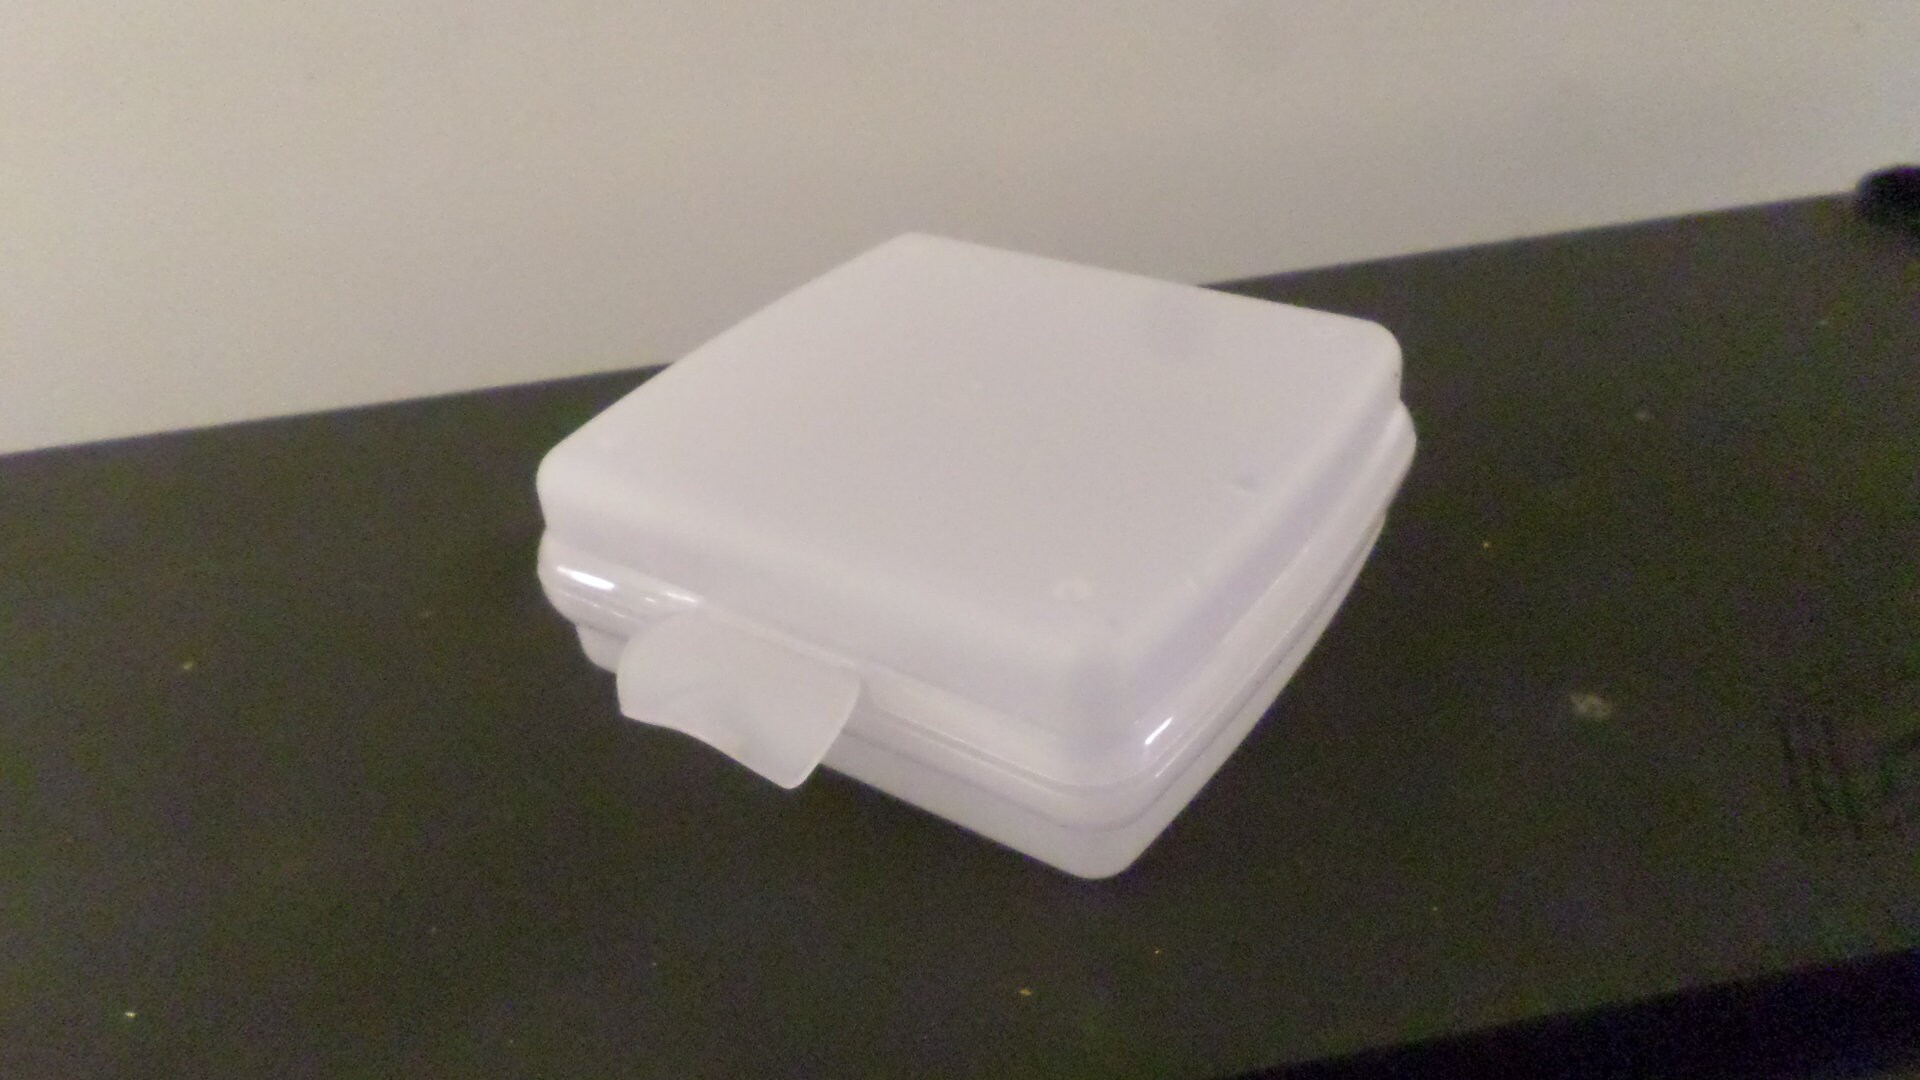 Cynthia's Independent Tupperware Shop & Party - Sandwich Keepers Perfect  for sandwiches, morning bagels and wraps. Set of two hinged, one-piece  containers help you cut lunch costs and reduce food waste. The